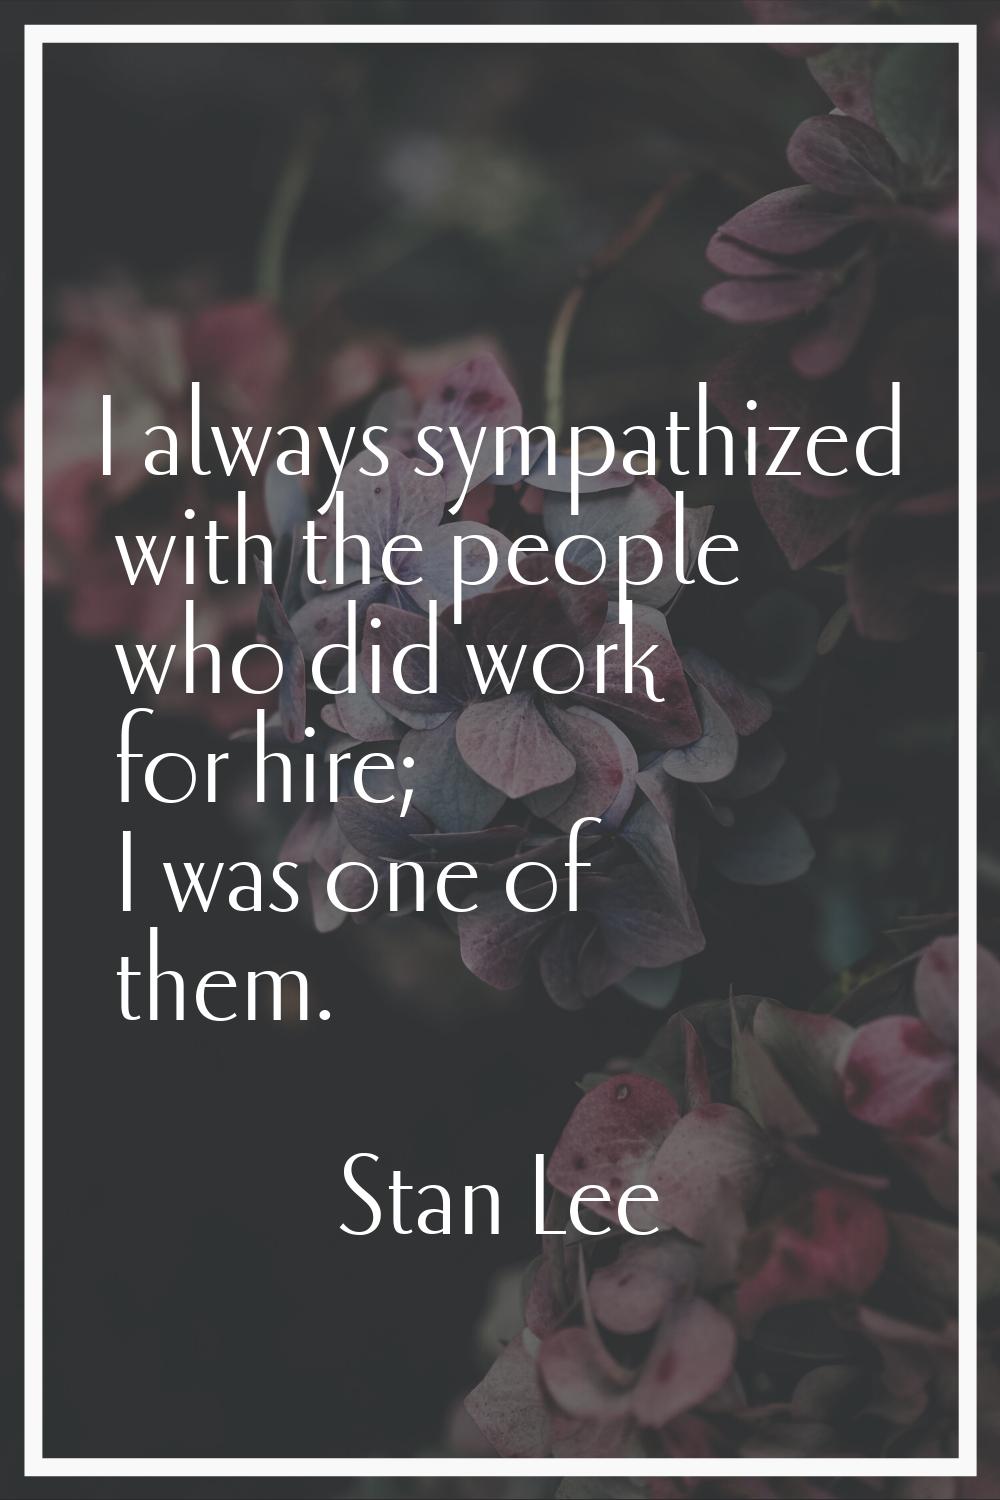 I always sympathized with the people who did work for hire; I was one of them.